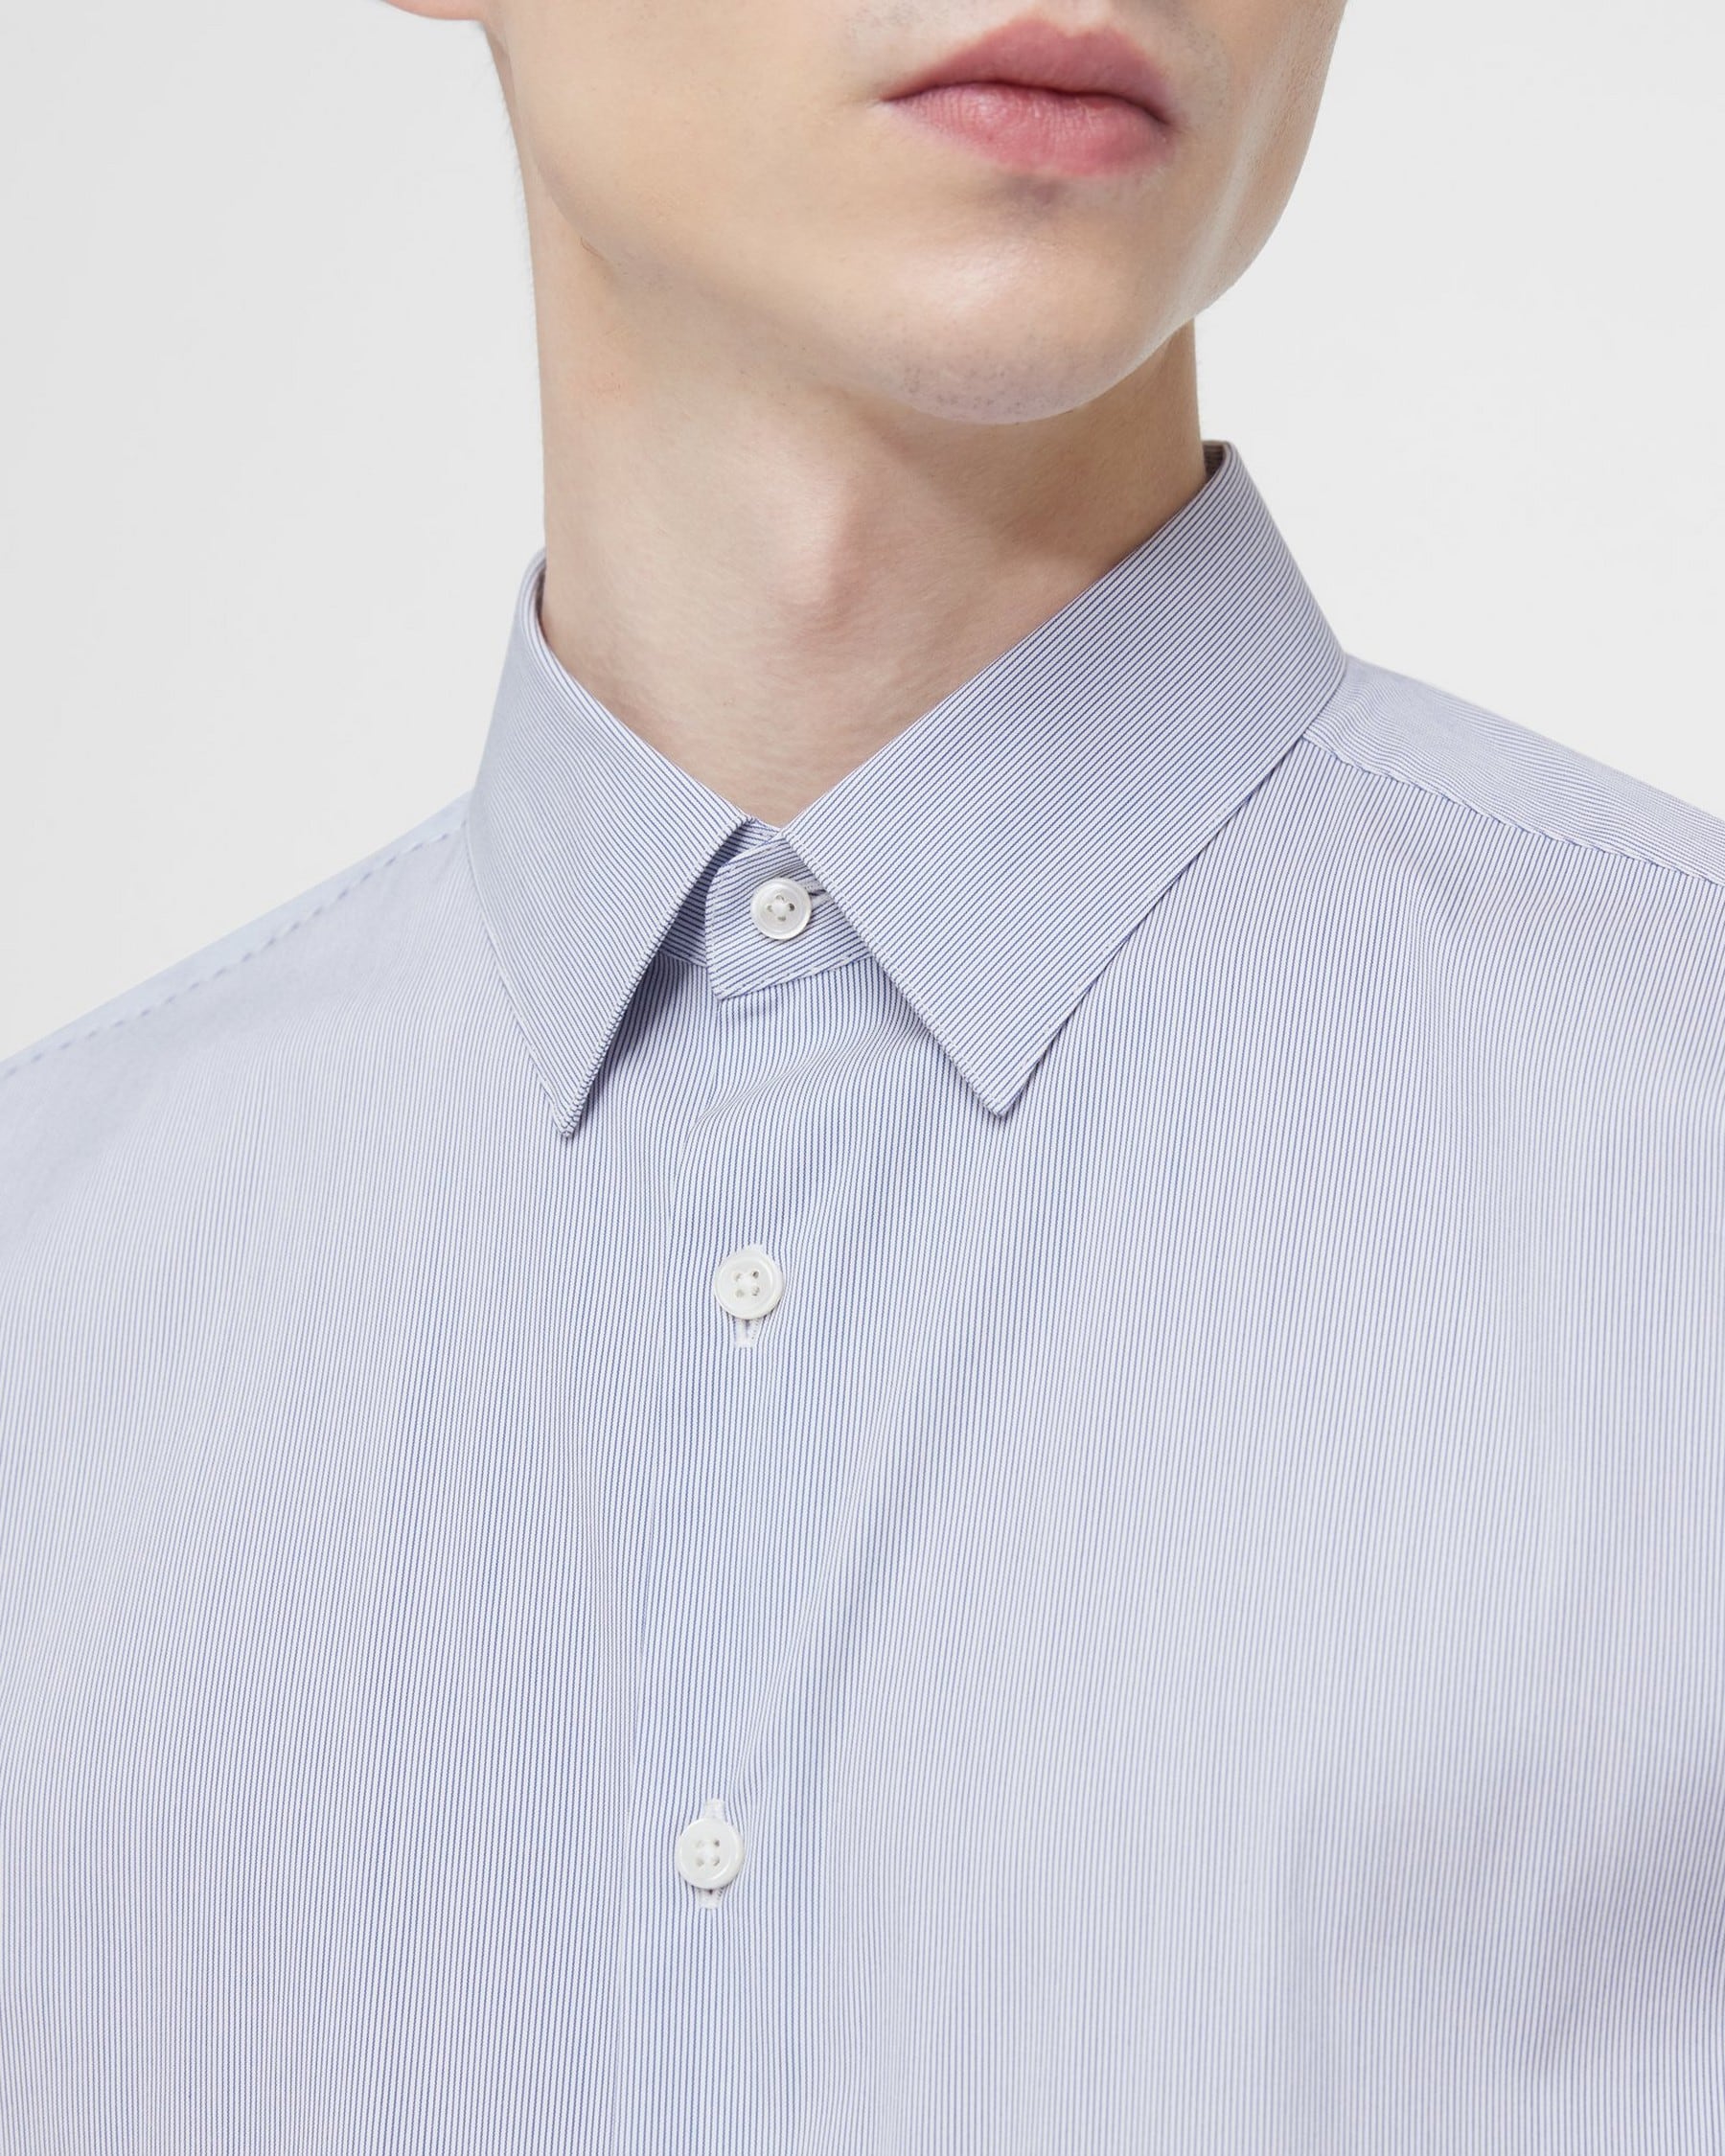 Irving Shirt in Striped Cotton Blend